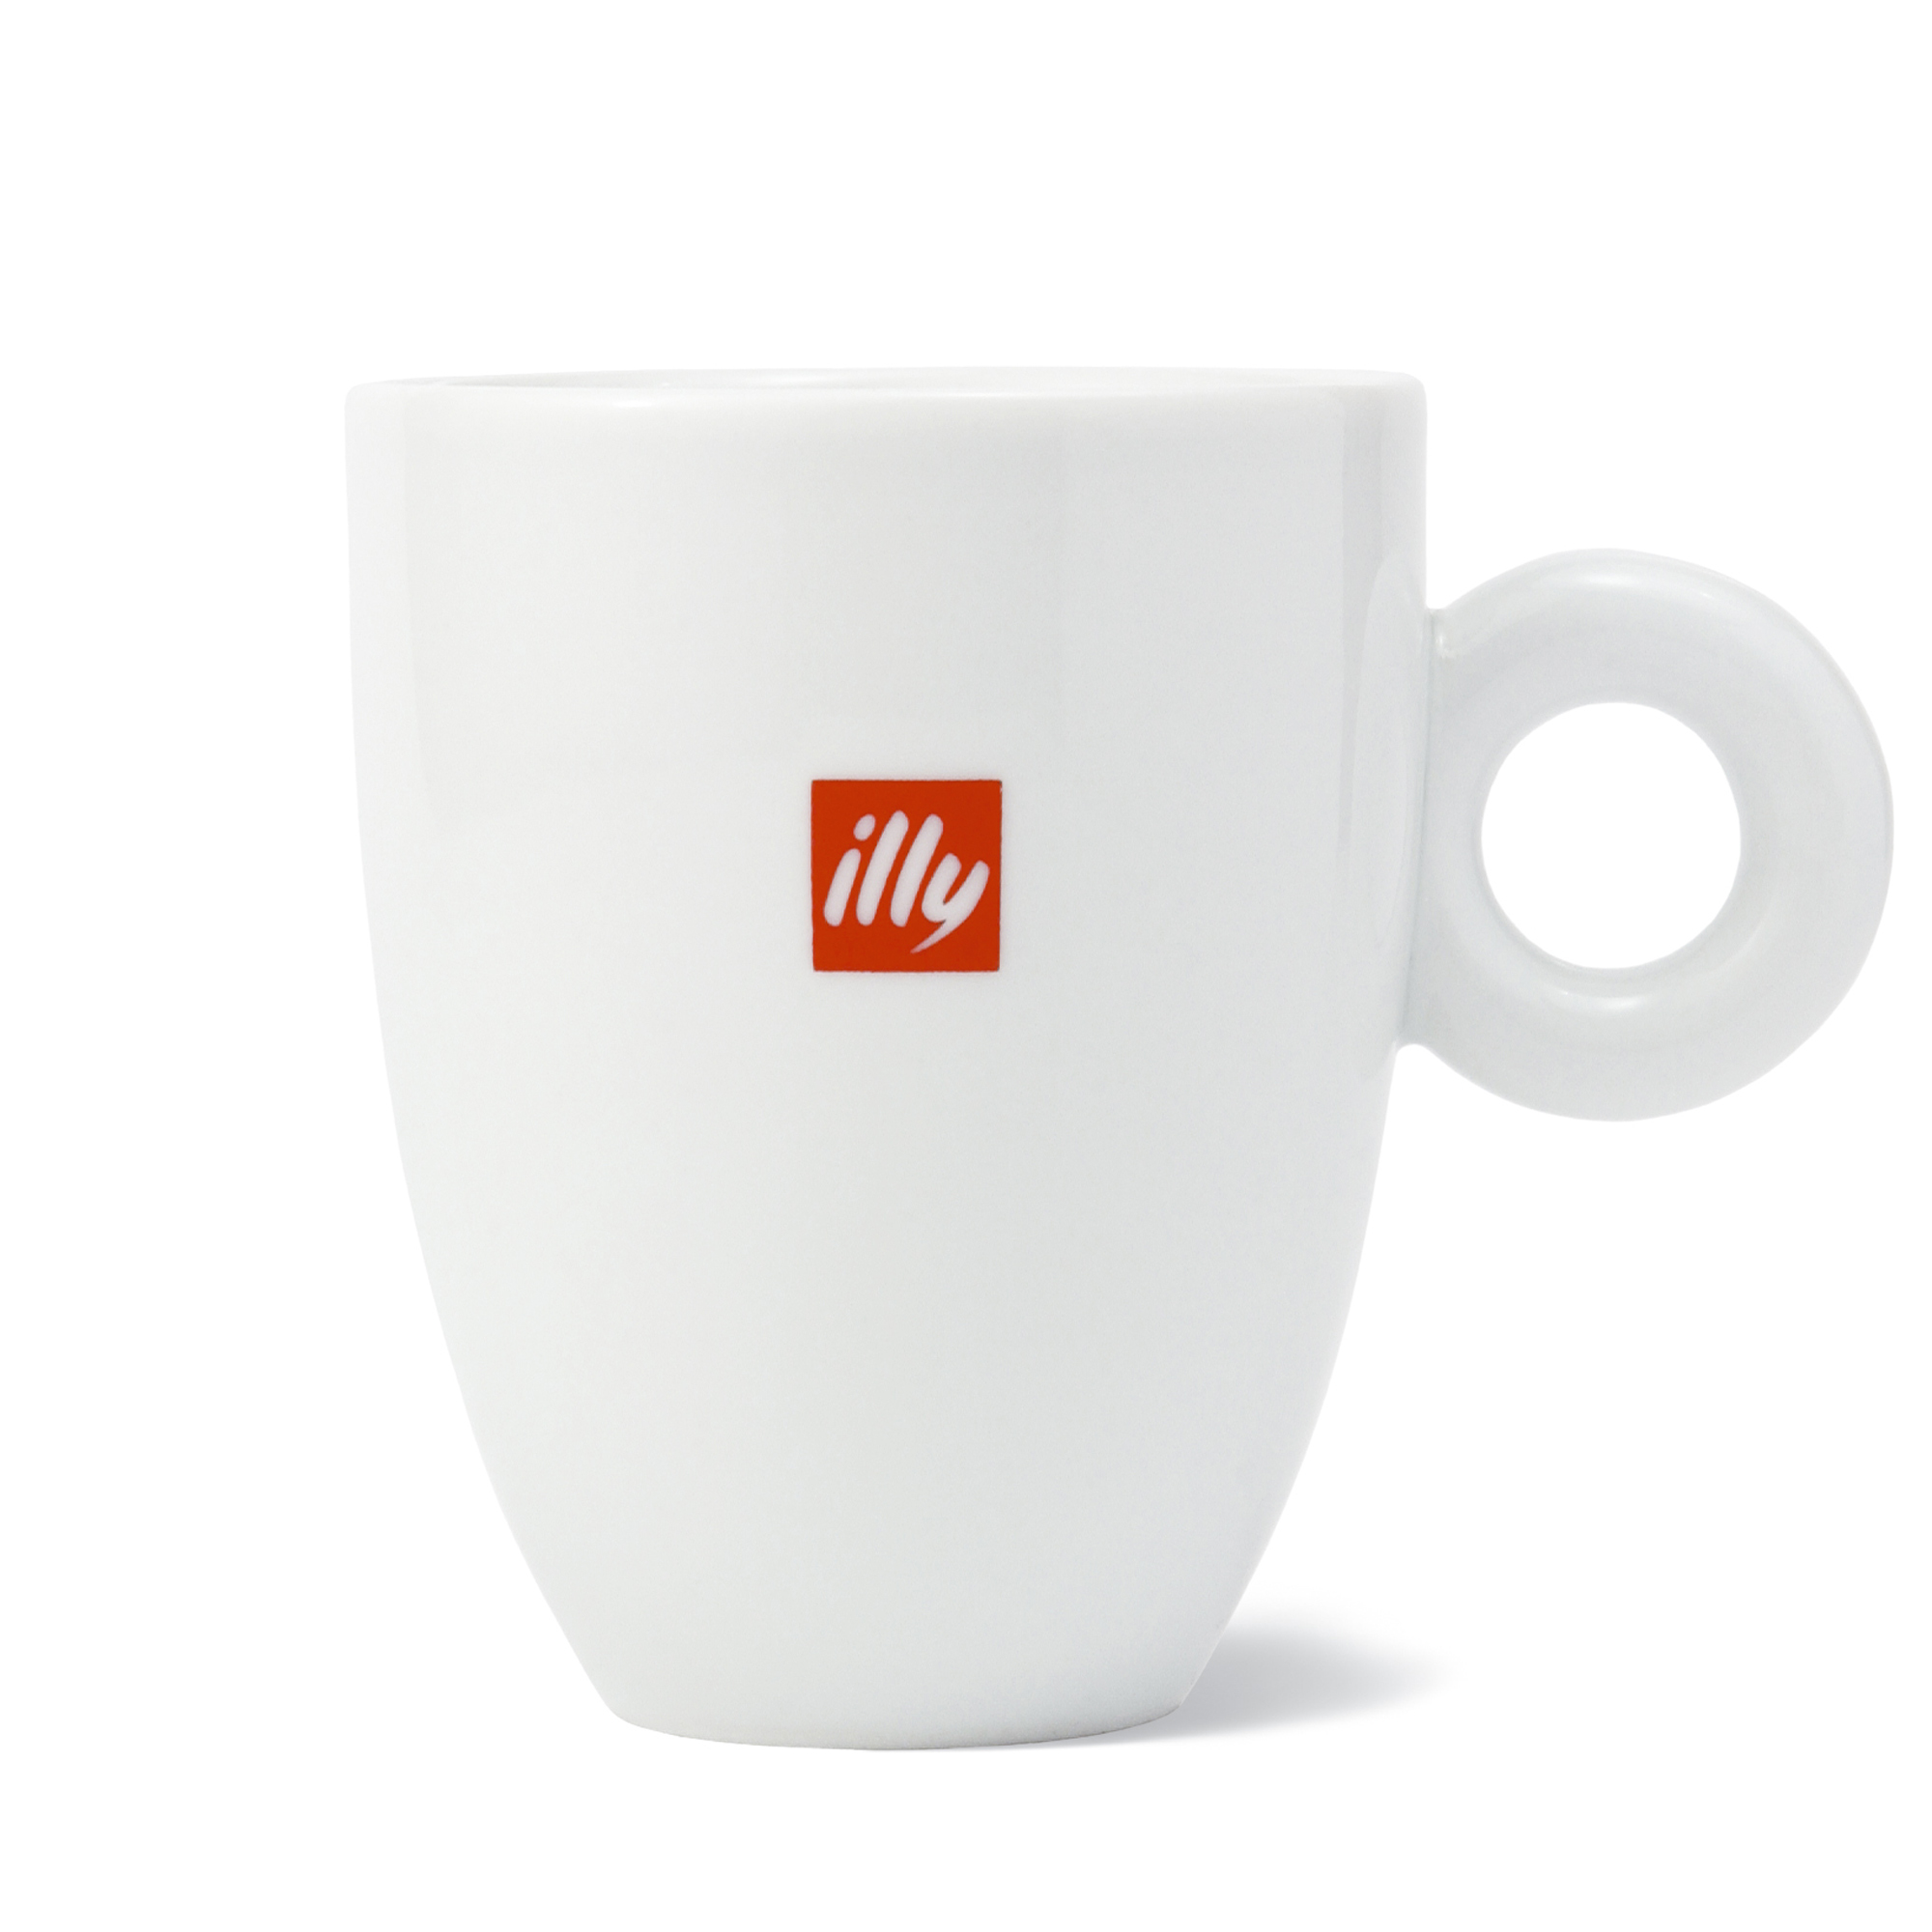 Illy illy Art Collection The Watermill Center Robert Wilson 'OK' Design Set of 2 Mugs 